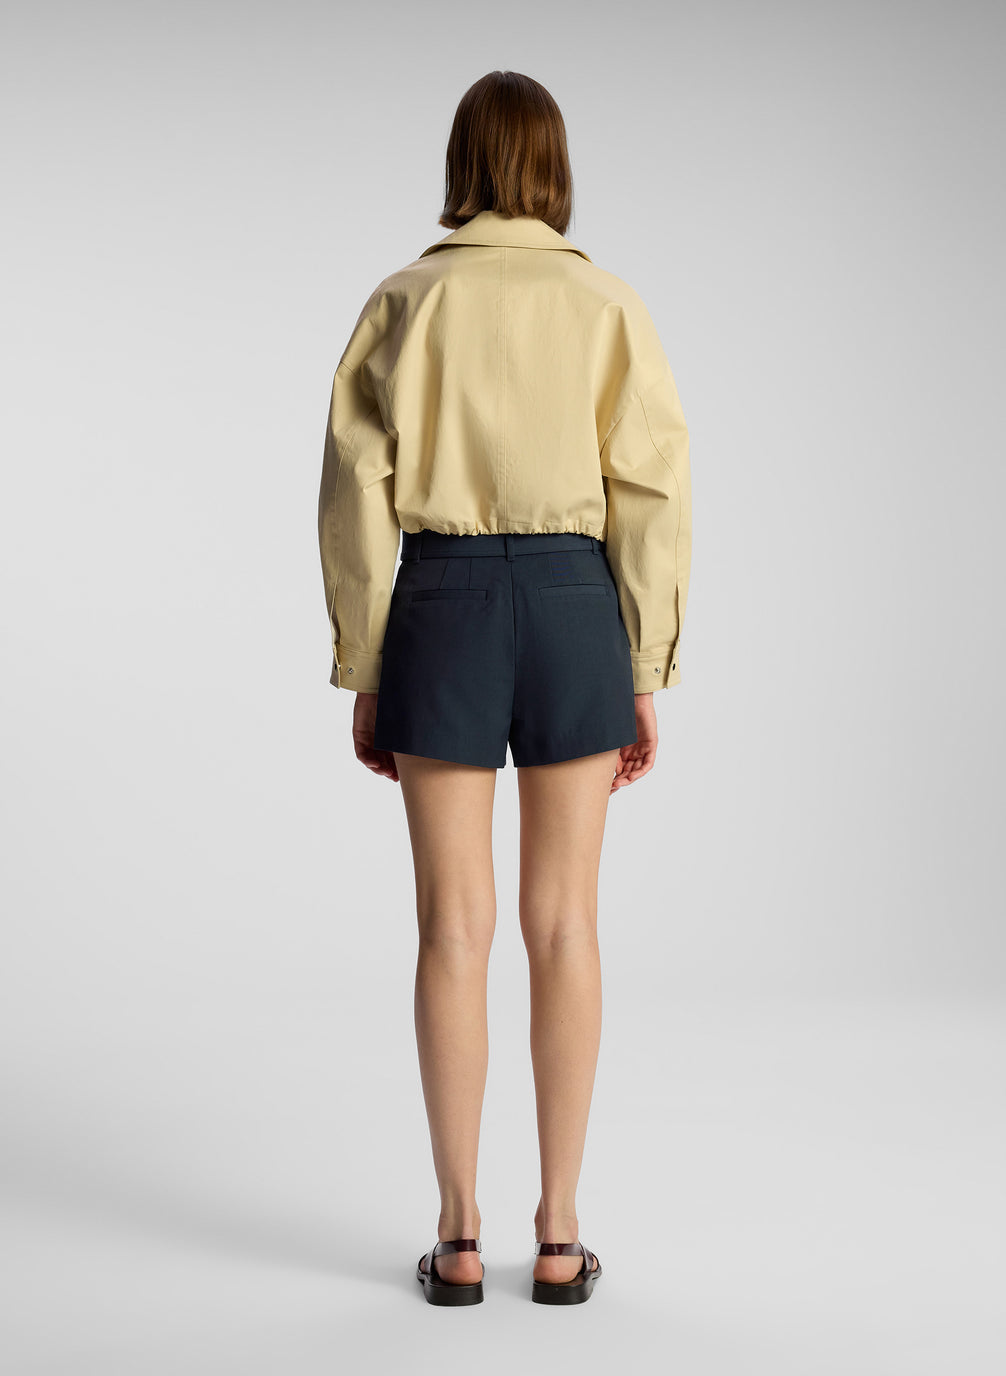 back view of woman wearing tan jacket, cream bodysuit, and navy blue shorts